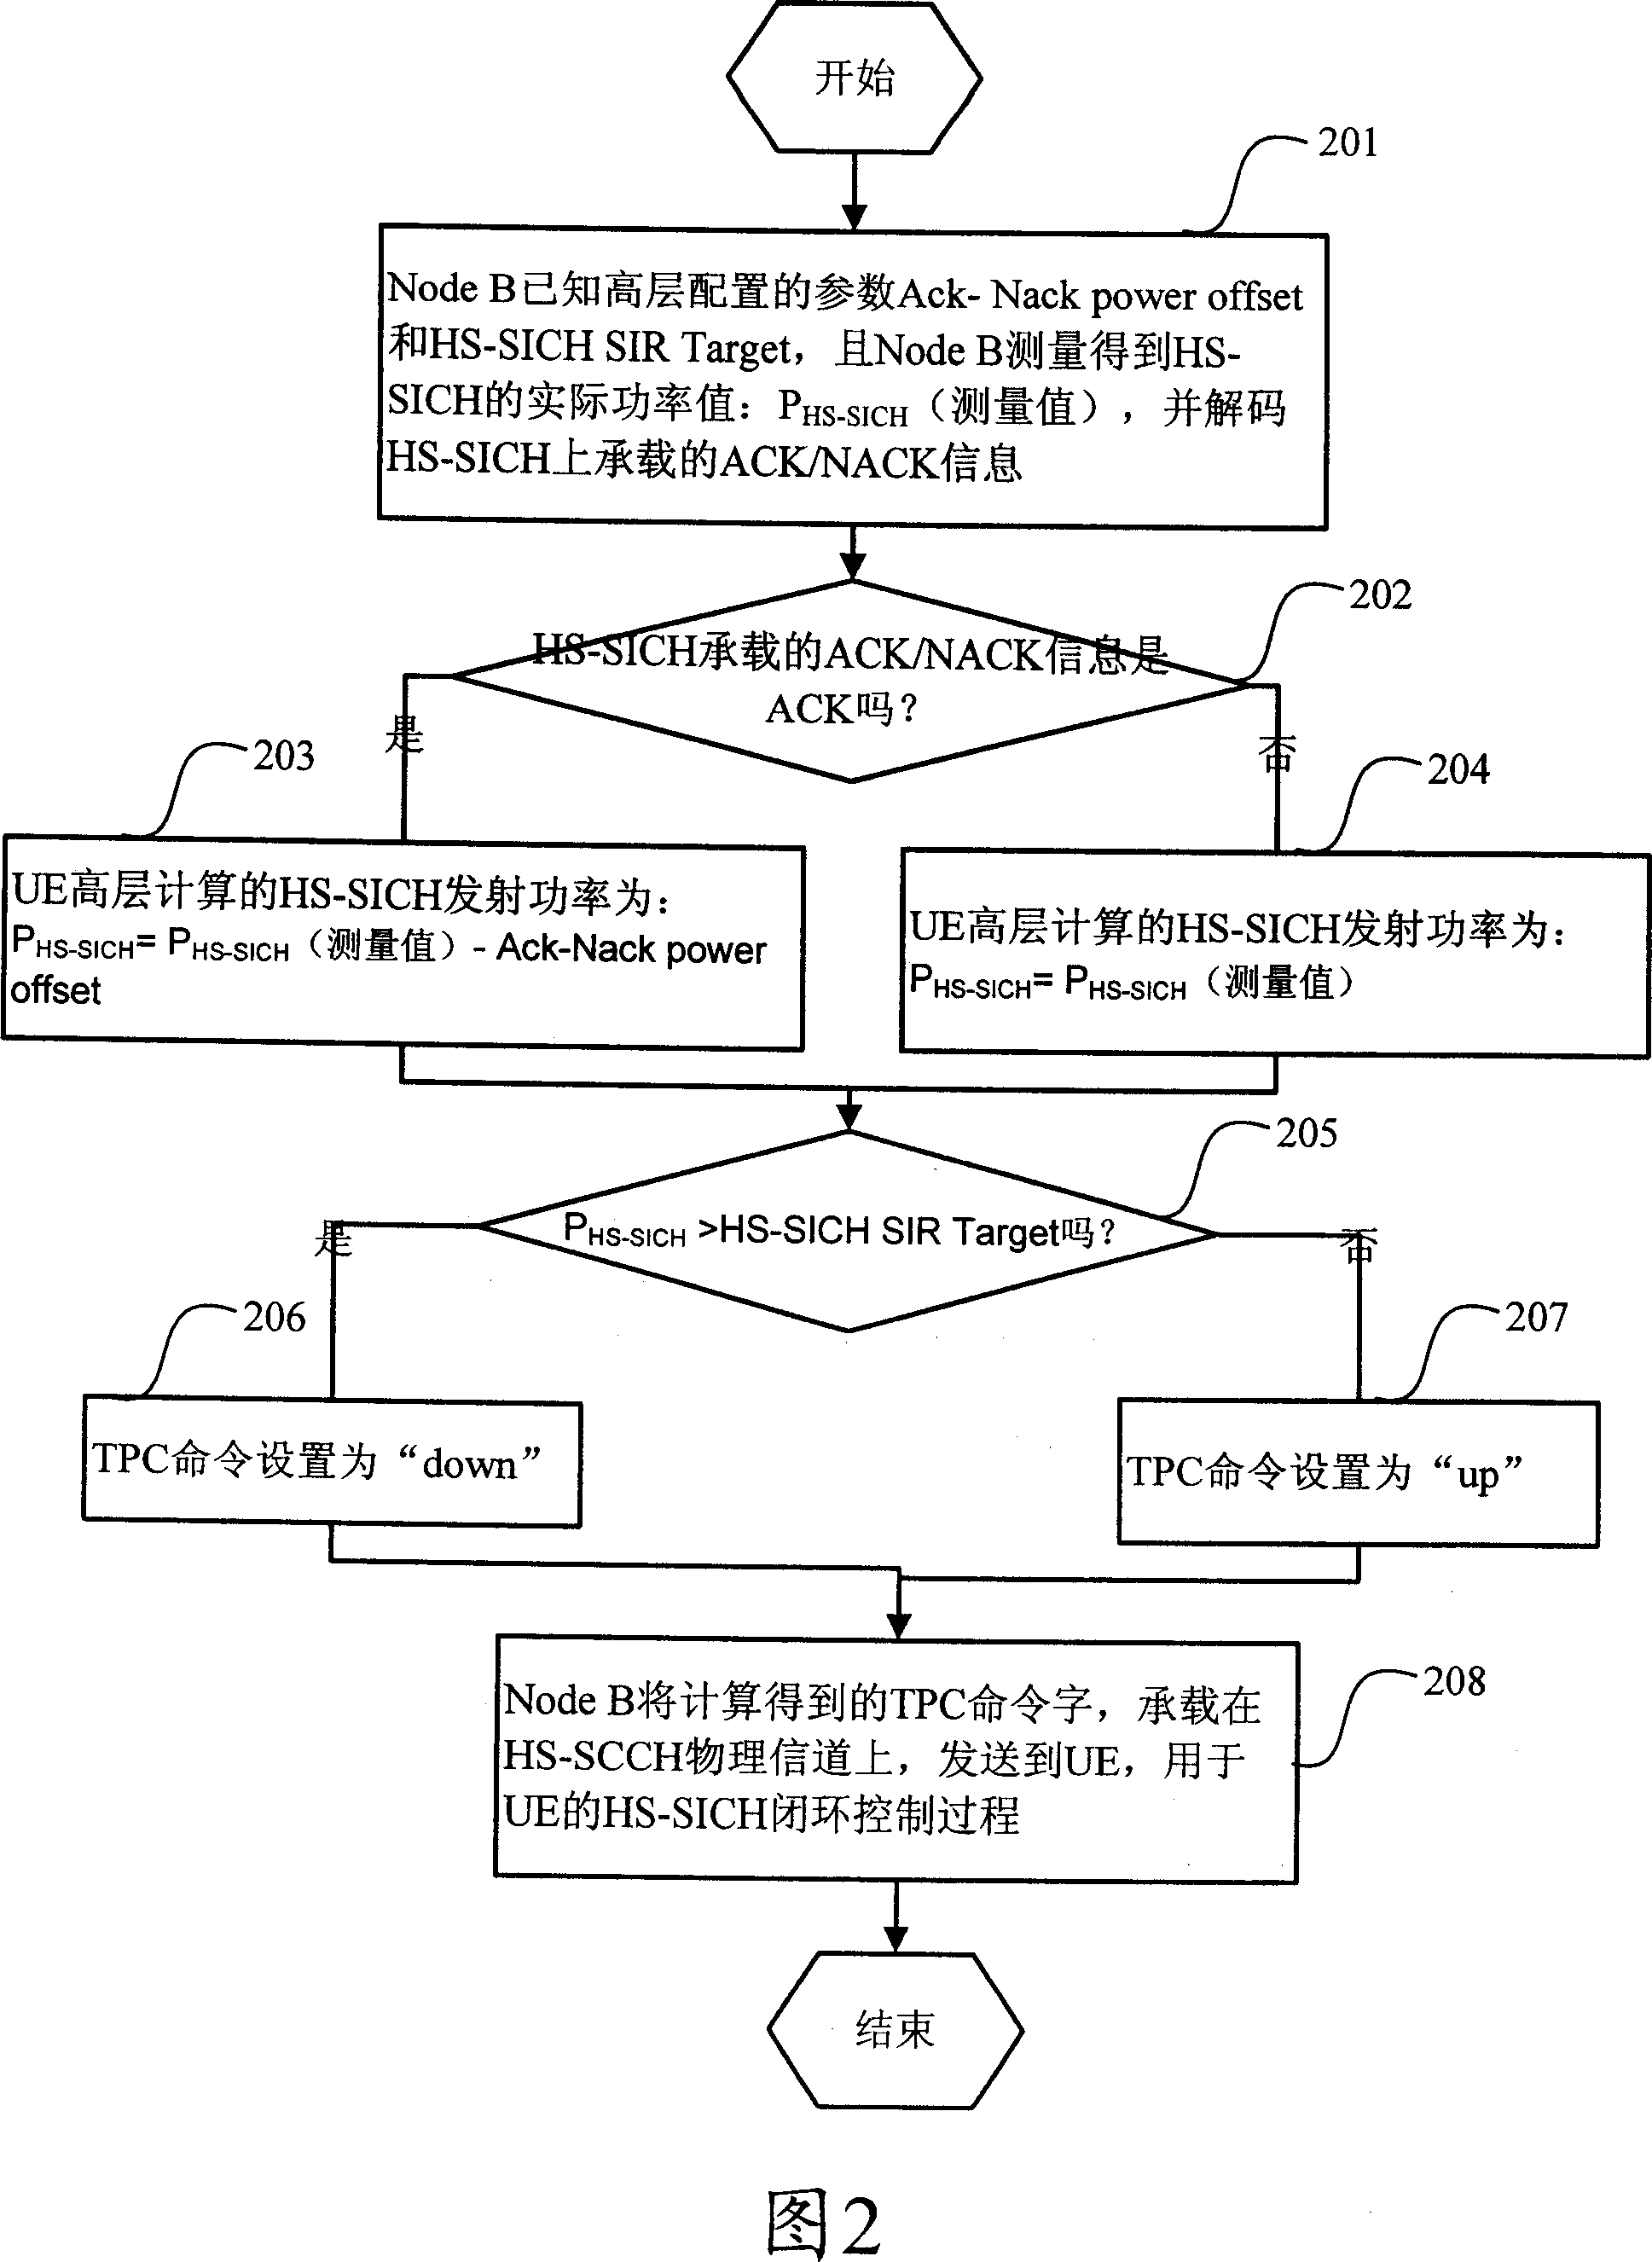 Method for node B to configure power control parameter of high-speed sharing information channel